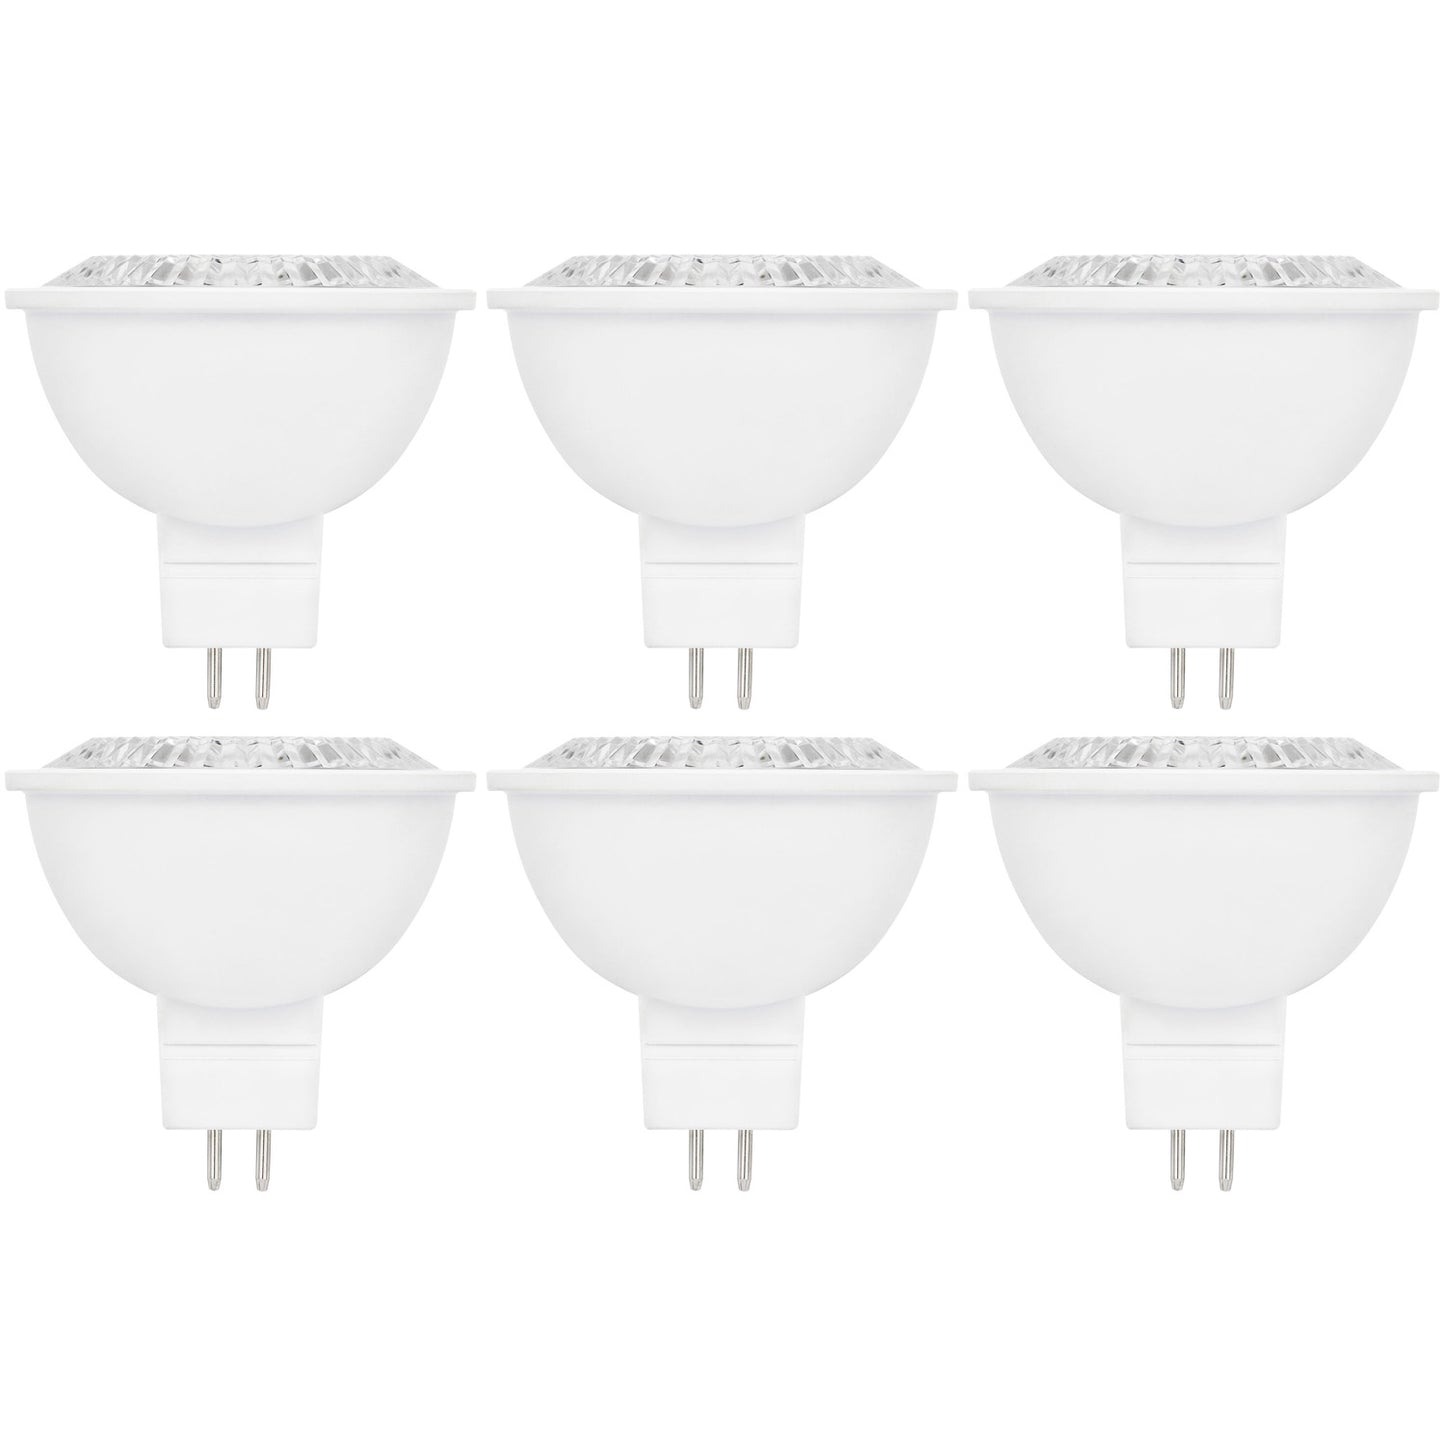 Sunlite LED MR16 Reflector Light Bulb, 7 Watts (50W Equivalent), 12 Volts, 500 Lumens, 90 CRI Dimmable, Twist & Lock GU5.3 Base, Energy Star Certified, UL Listed, 3000K Warm White - 6 Pack